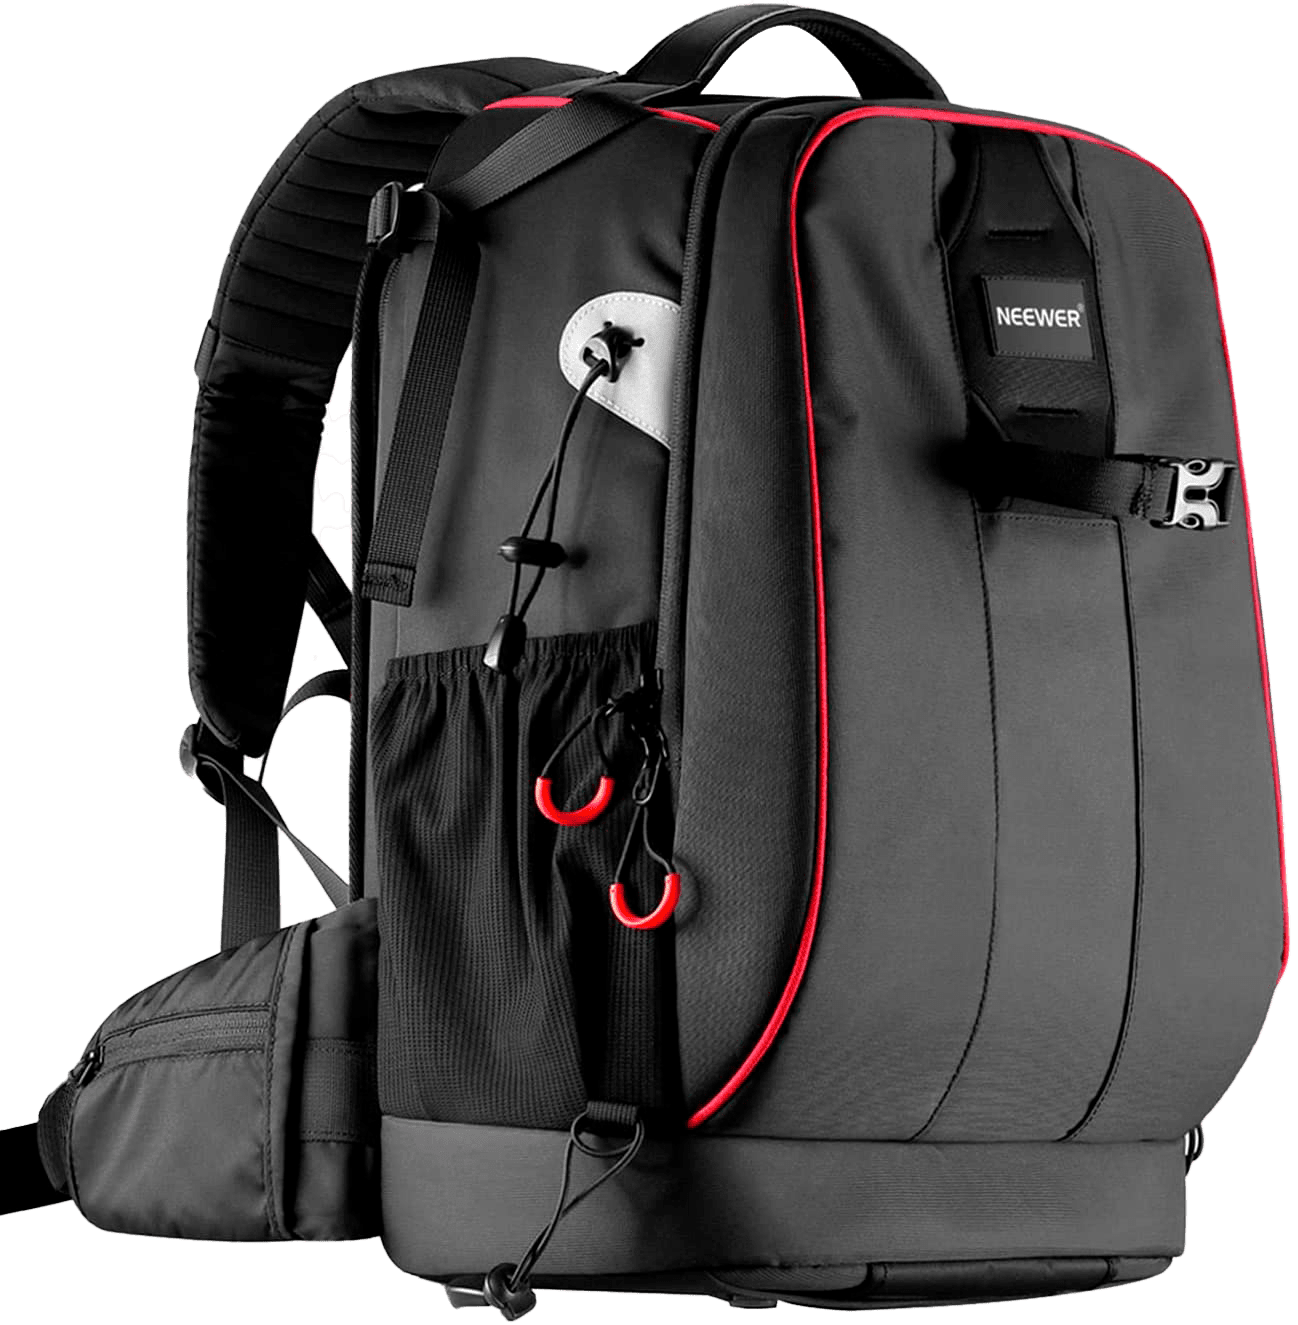 Backpack for photographic equipment